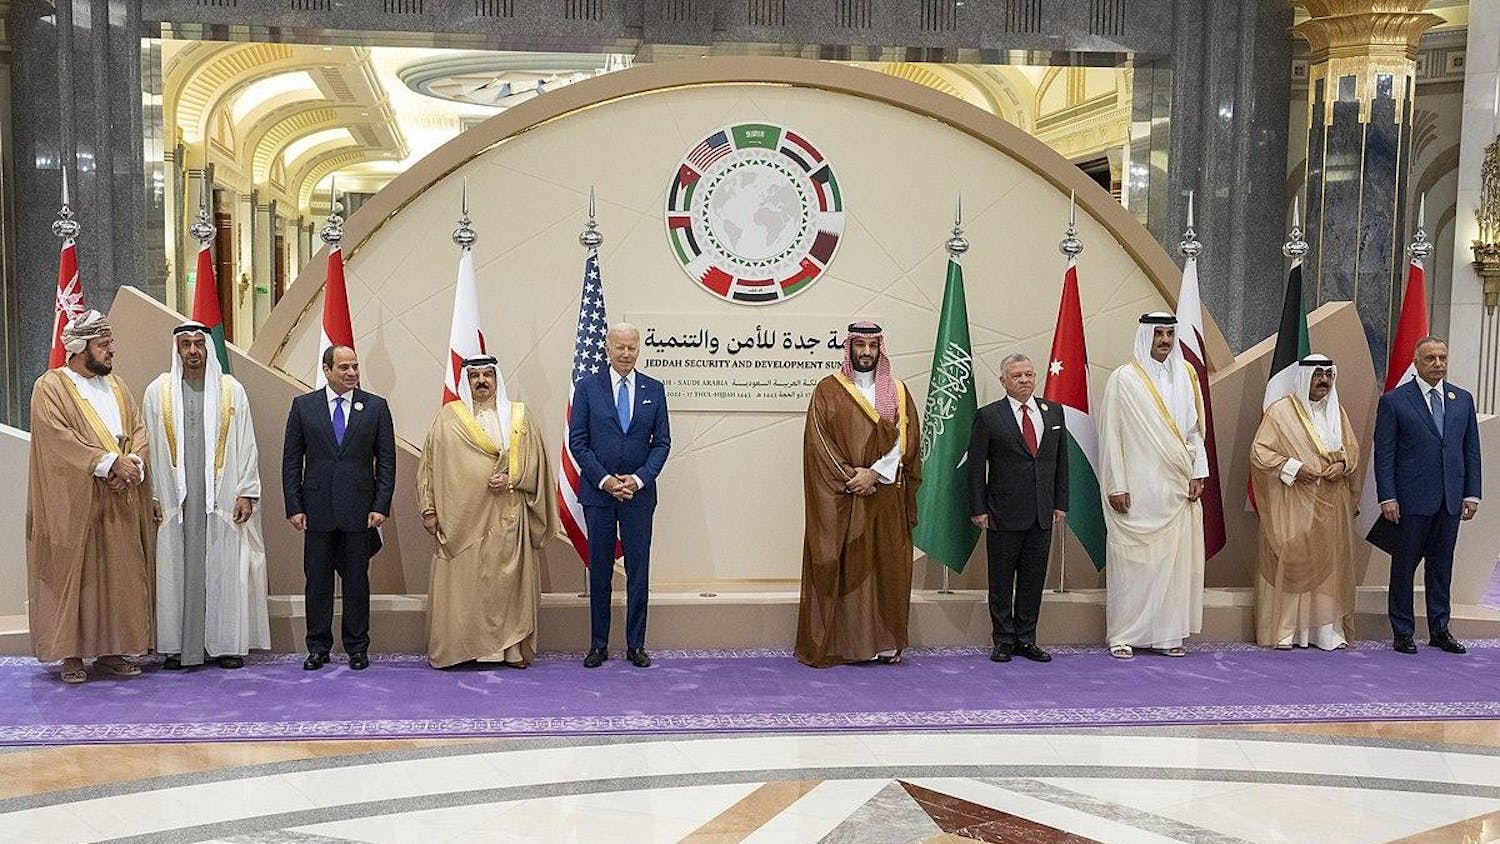 President_Joe_Biden_stands_with_leaders_of_the_GCC_countries,_Egypt,_Iraq,_and_Jordan.jpg